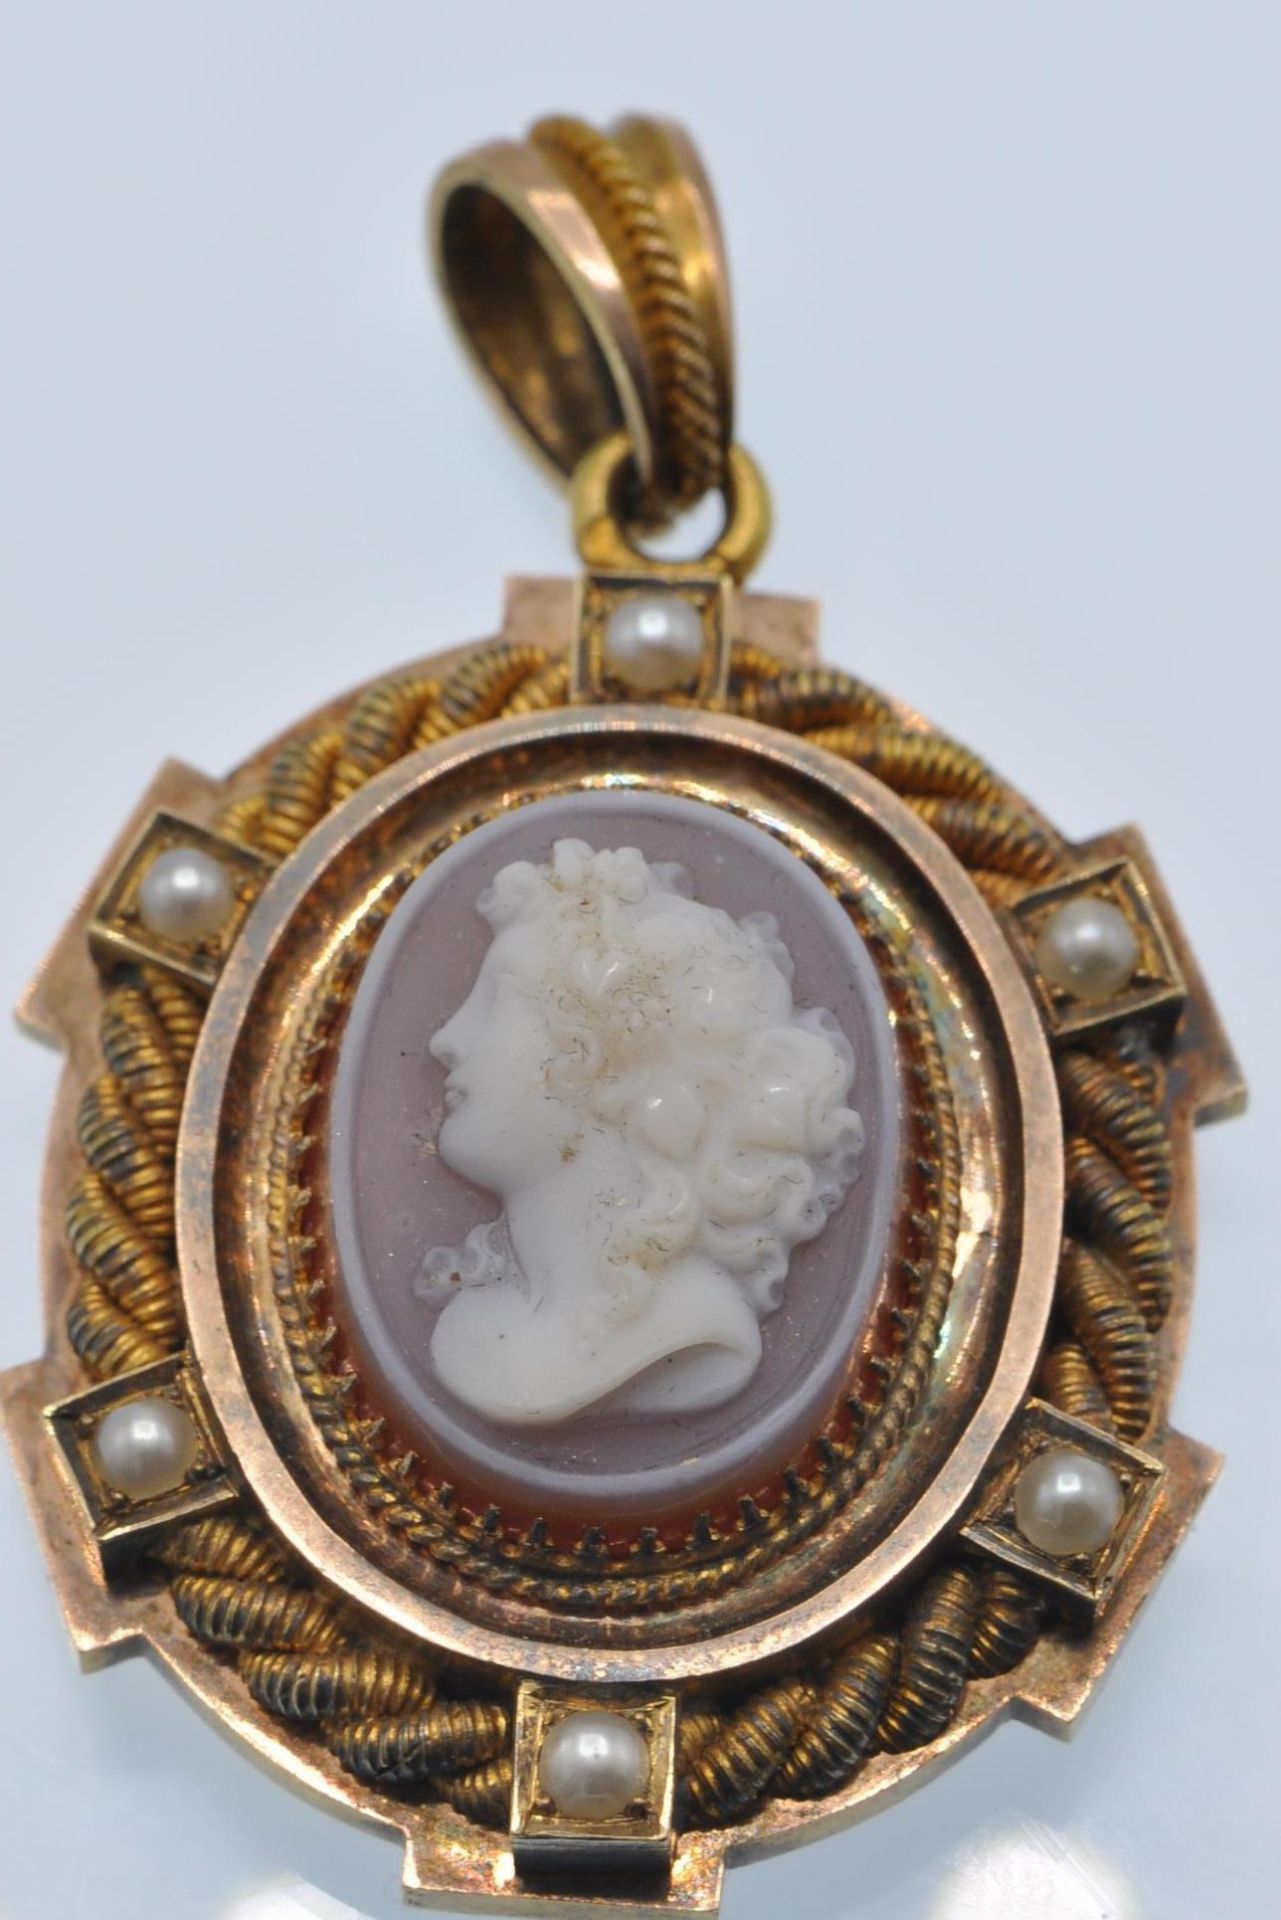 An Antique 18ct Gold French Agate Cameo & Pearl Locket - Image 4 of 7